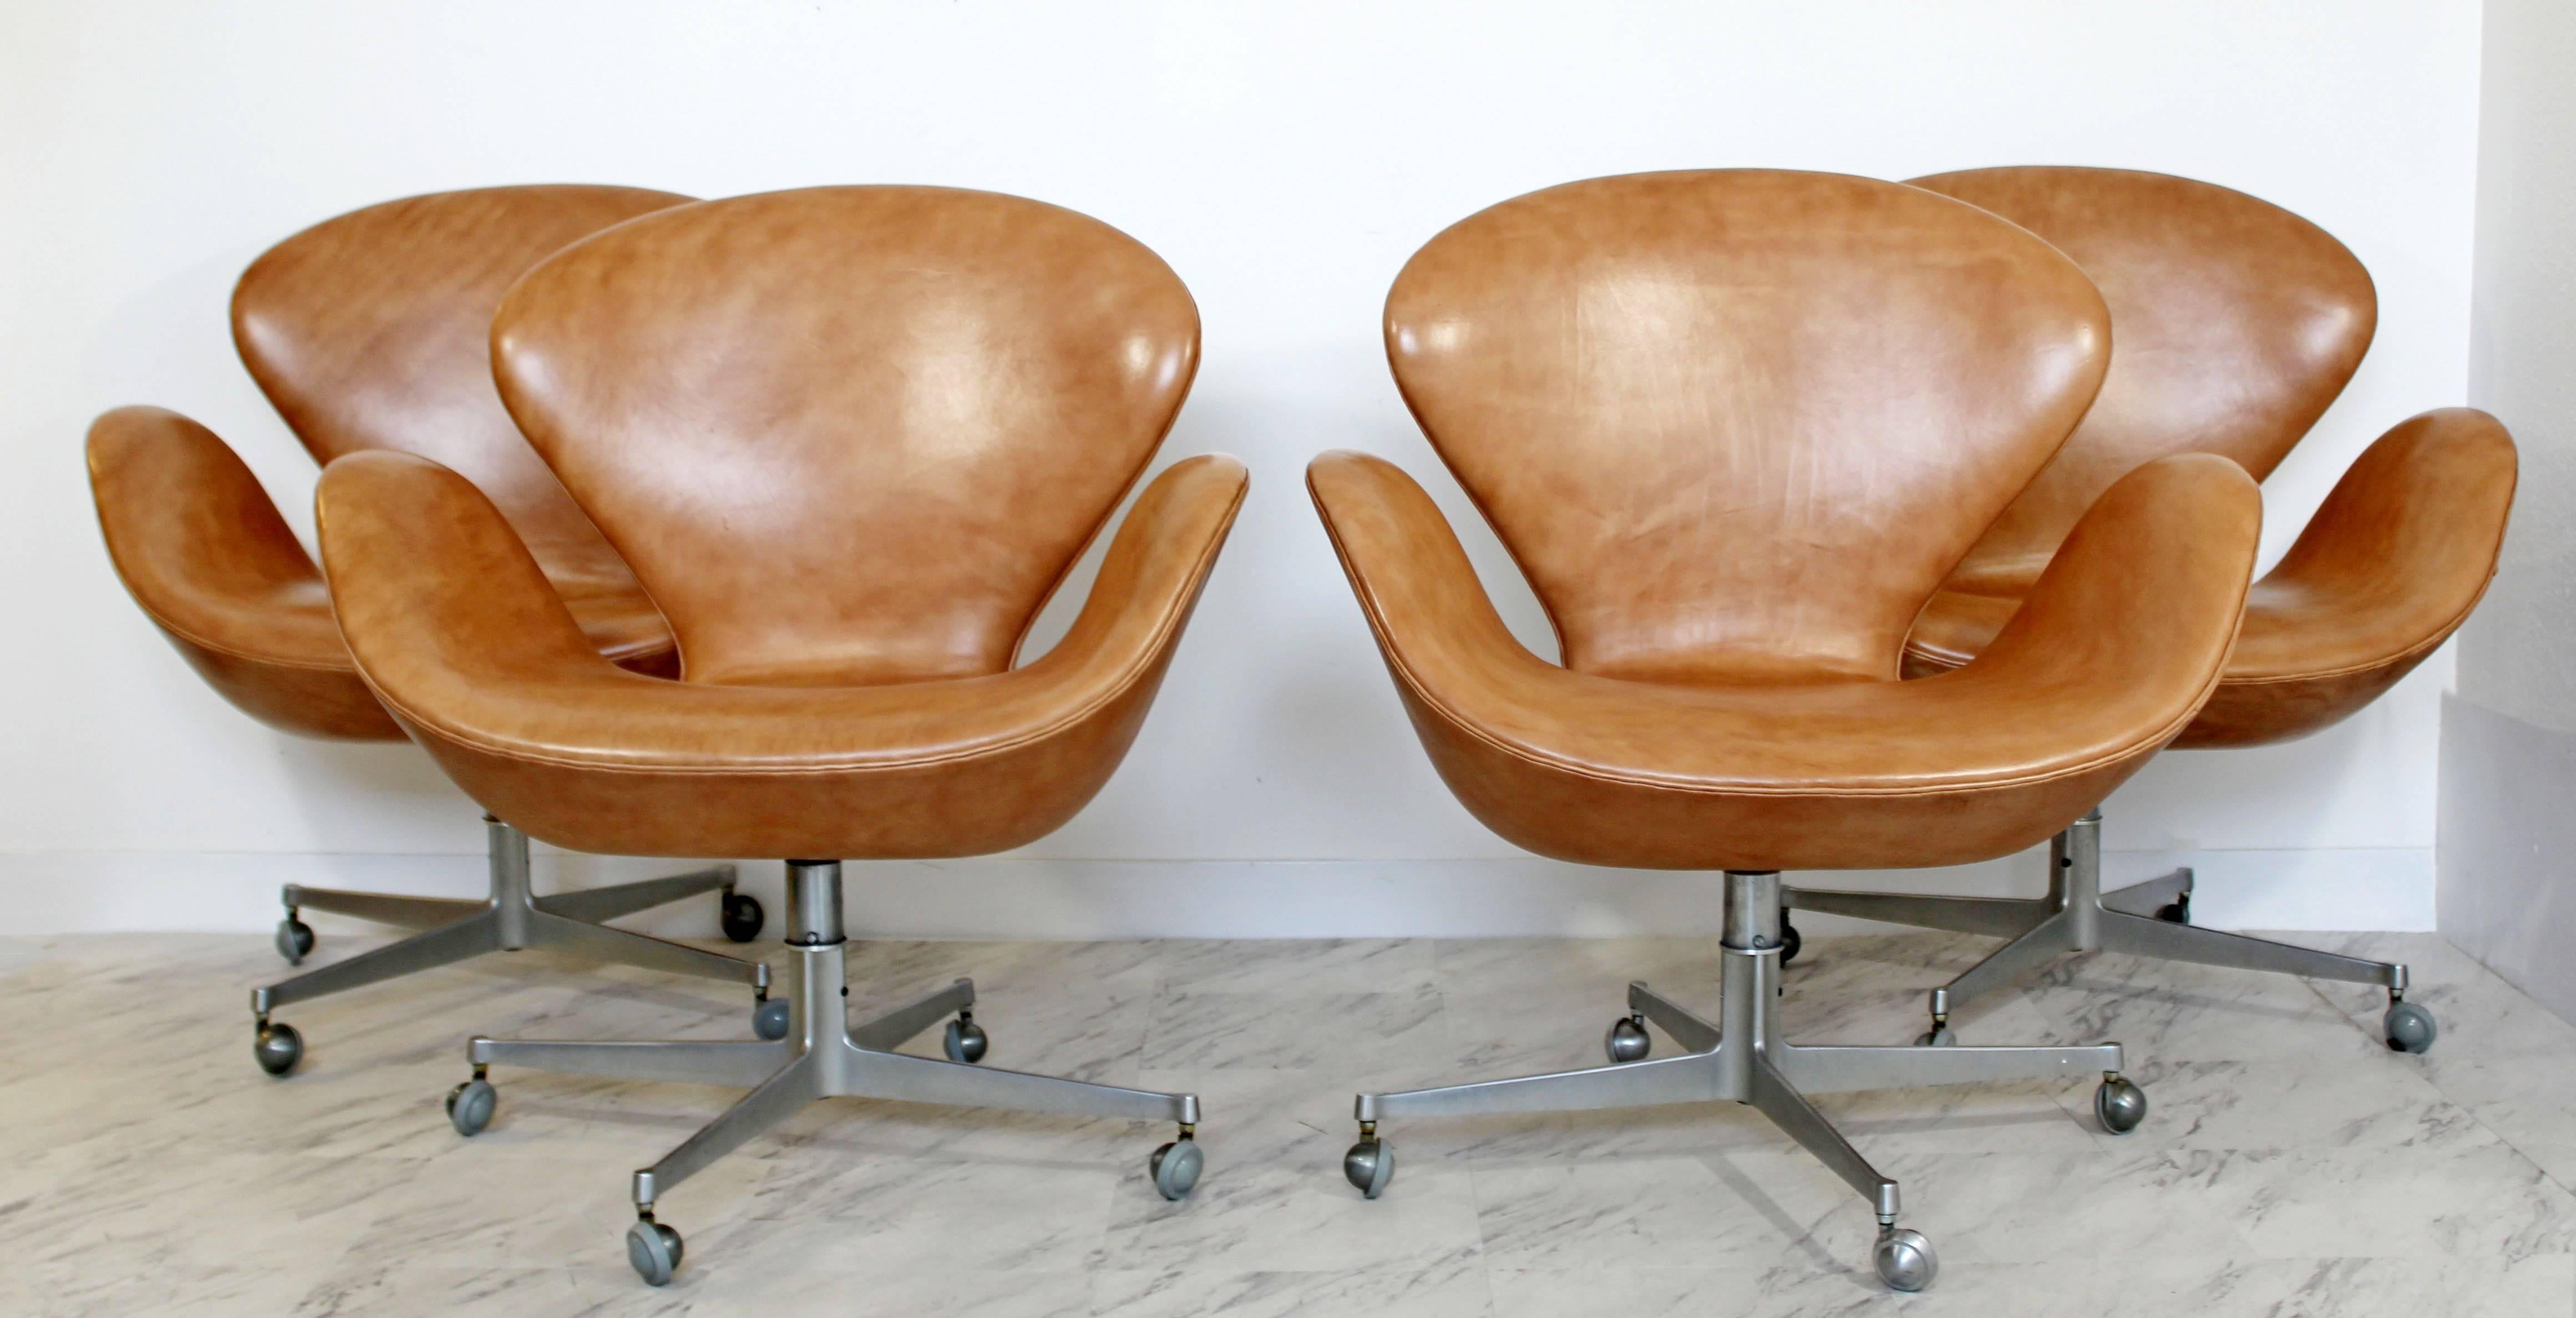 For your consideration is a magnificent pair of swivel, swan chairs on casters, by Arne Jacobsen for Fritz Hansen, circa the 1960s in Denmark. In a gorgeous leather upholstery. In excellent condition. The dimensions are 30